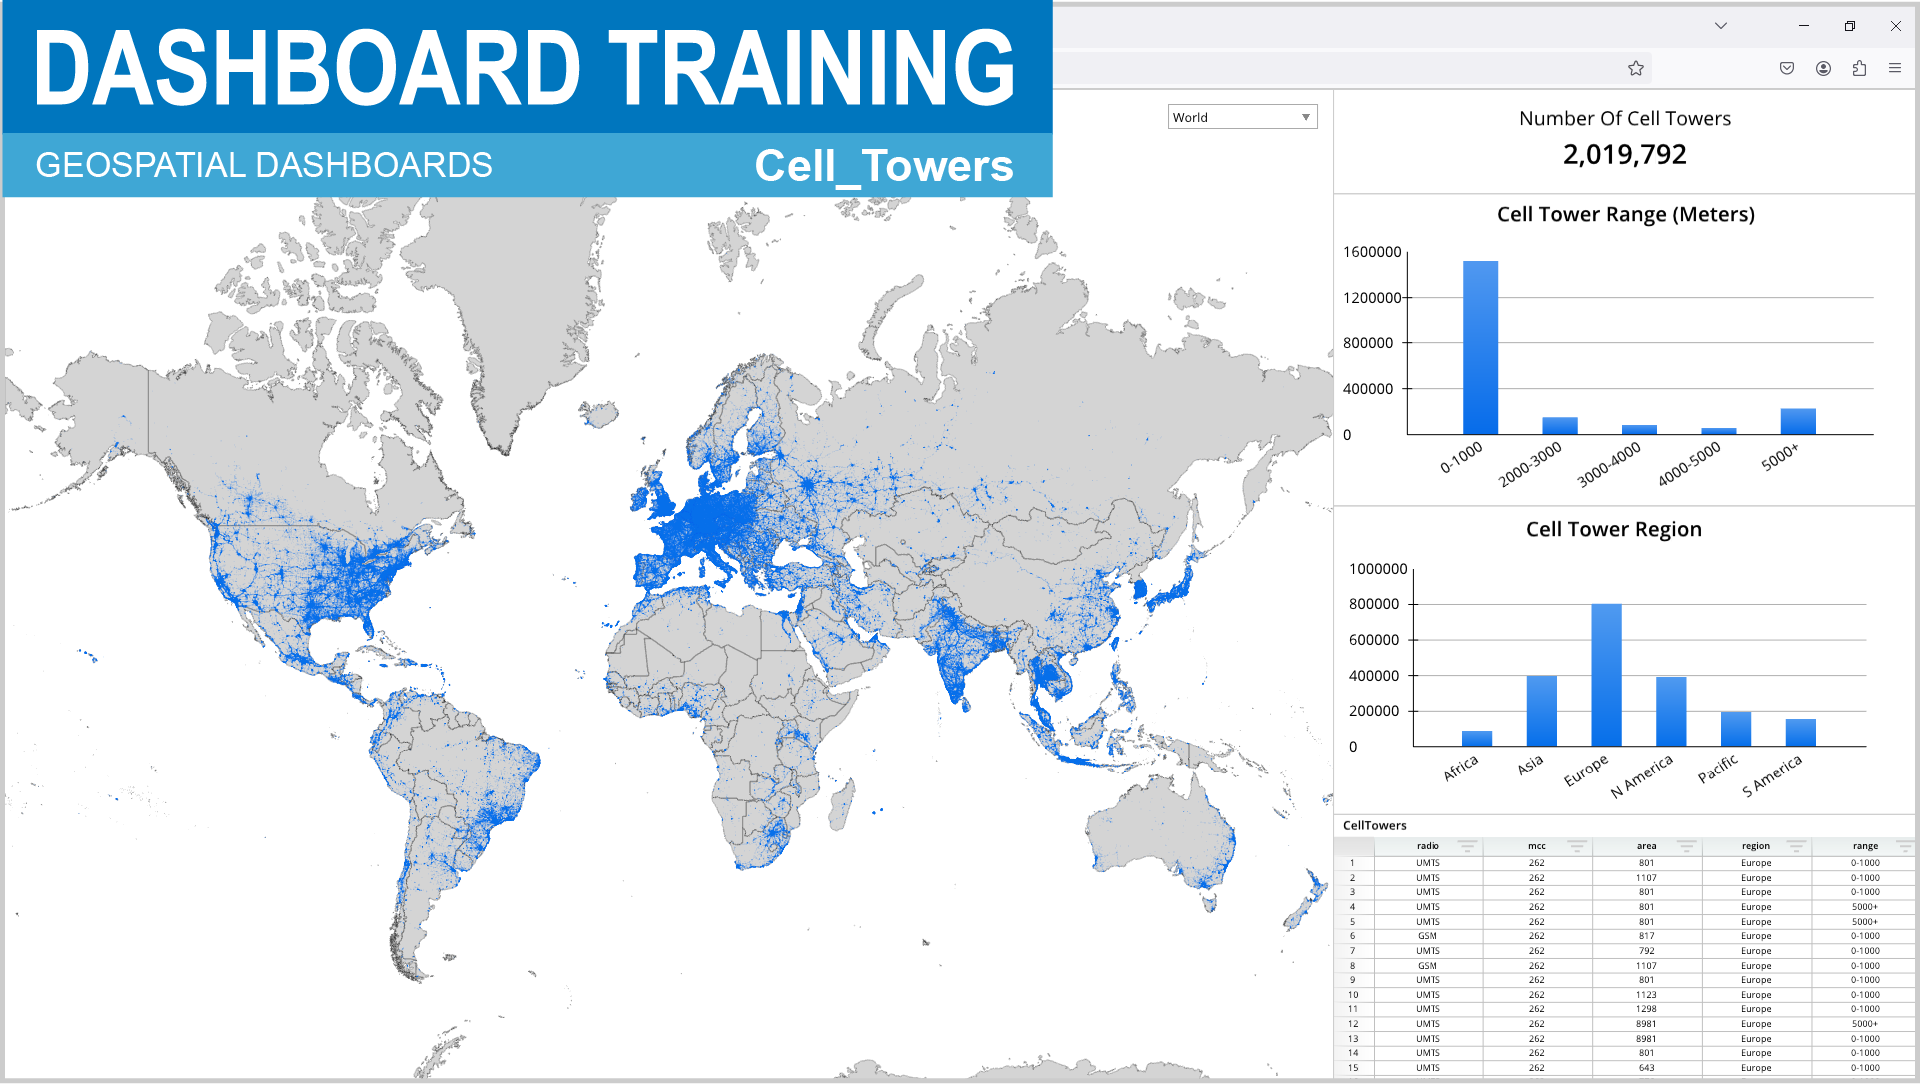 A map of the world with a blue border and the words "Geographical Dashboard Training" written in the top left corner. The map is filled with blue dots, representing cell towers. The dots are scattered across the globe, with some concentrated in specific regions. The image also displays a chart with the number of cell towers in each region.